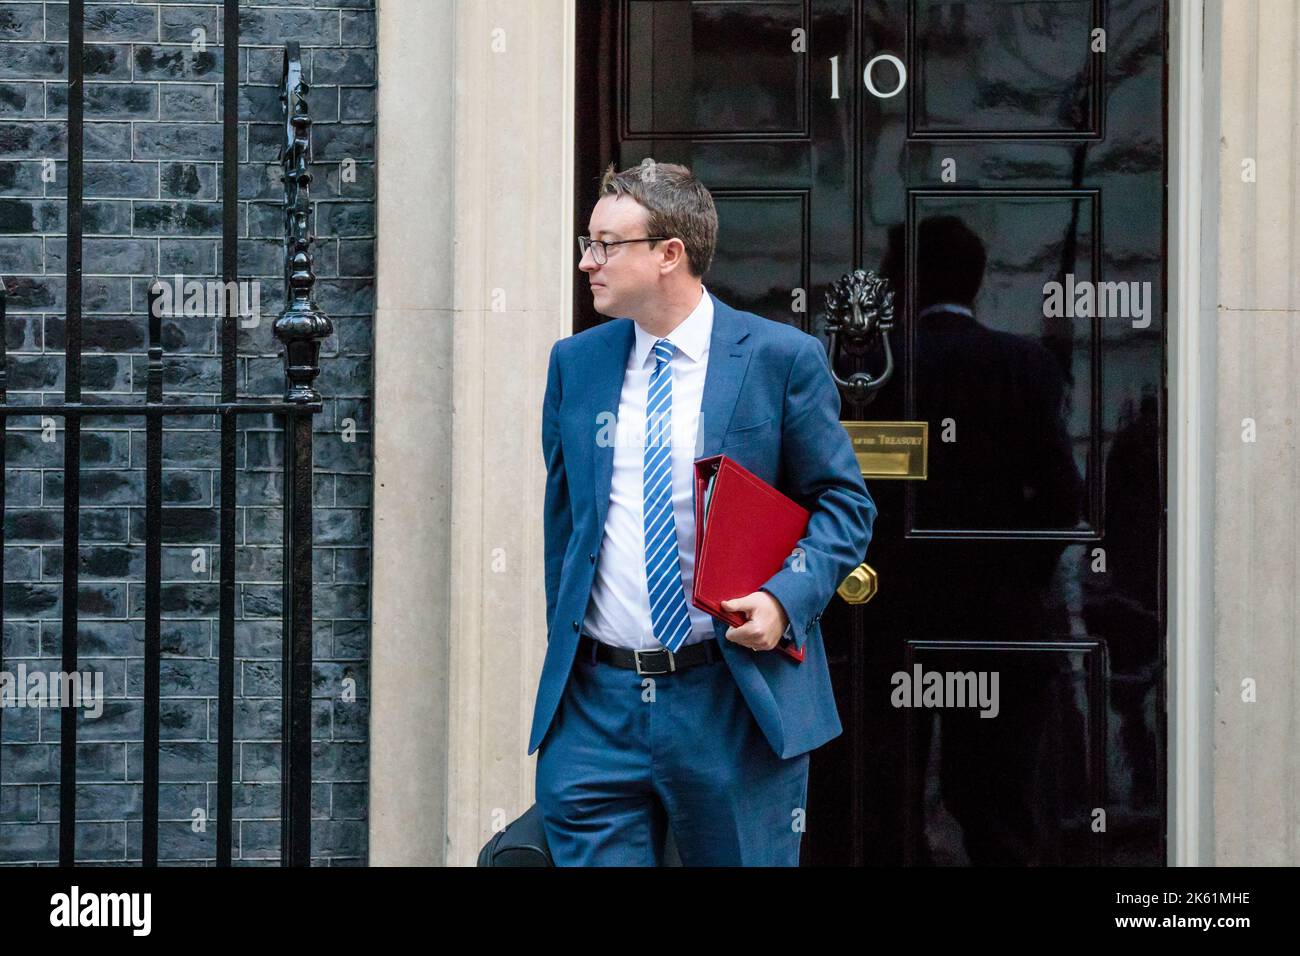 Downing Street, London, UK. 11th October 2022. Ministers attend the first Cabinet Meeting at 10 Downing Street since the Conservative Party Conference last week. Simon Clarke MP, Secretary of State for Levelling Up, Housing and Communities. Amanda Rose/Alamy Live News Stock Photo